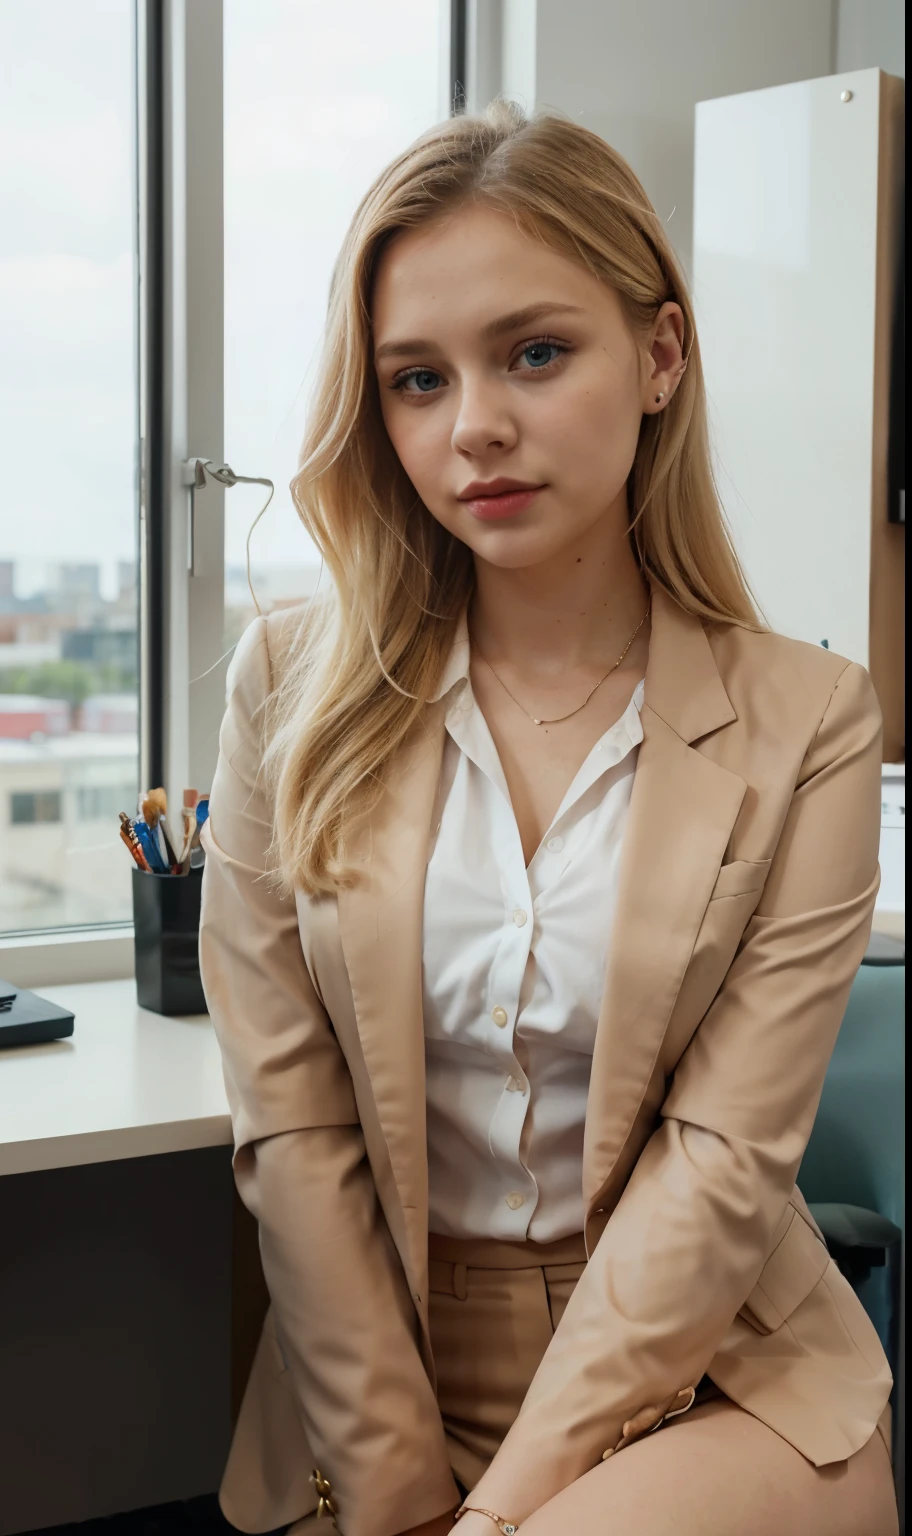 Girl Dasha, blonde, sits in the office, Selfie on your phone, office suit, blazer, blouse